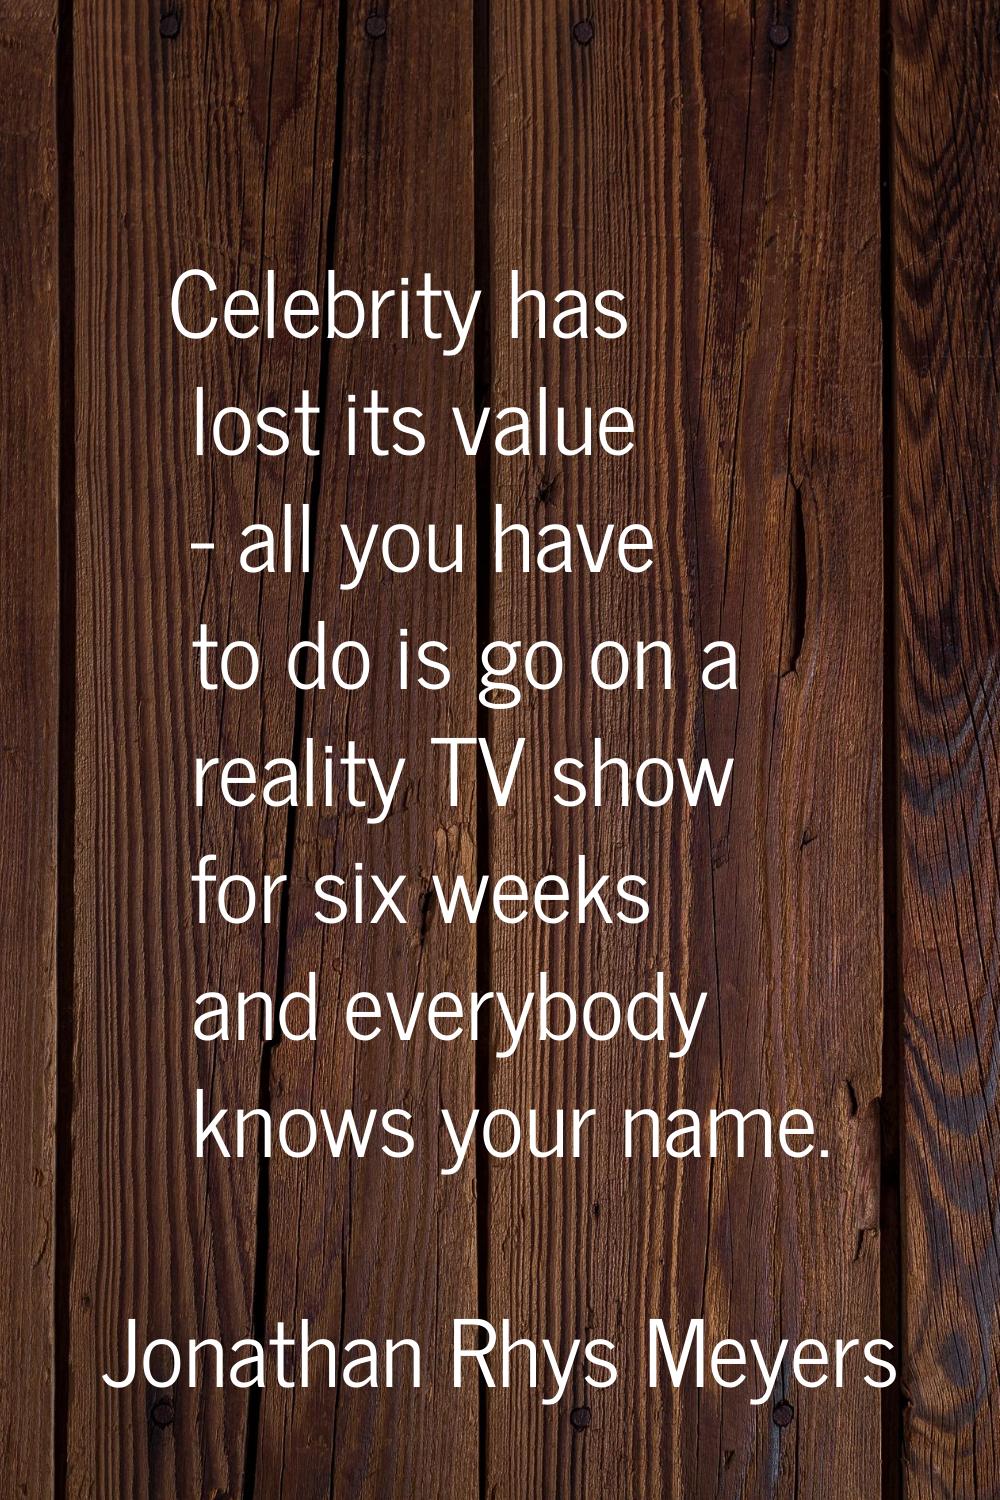 Celebrity has lost its value - all you have to do is go on a reality TV show for six weeks and ever